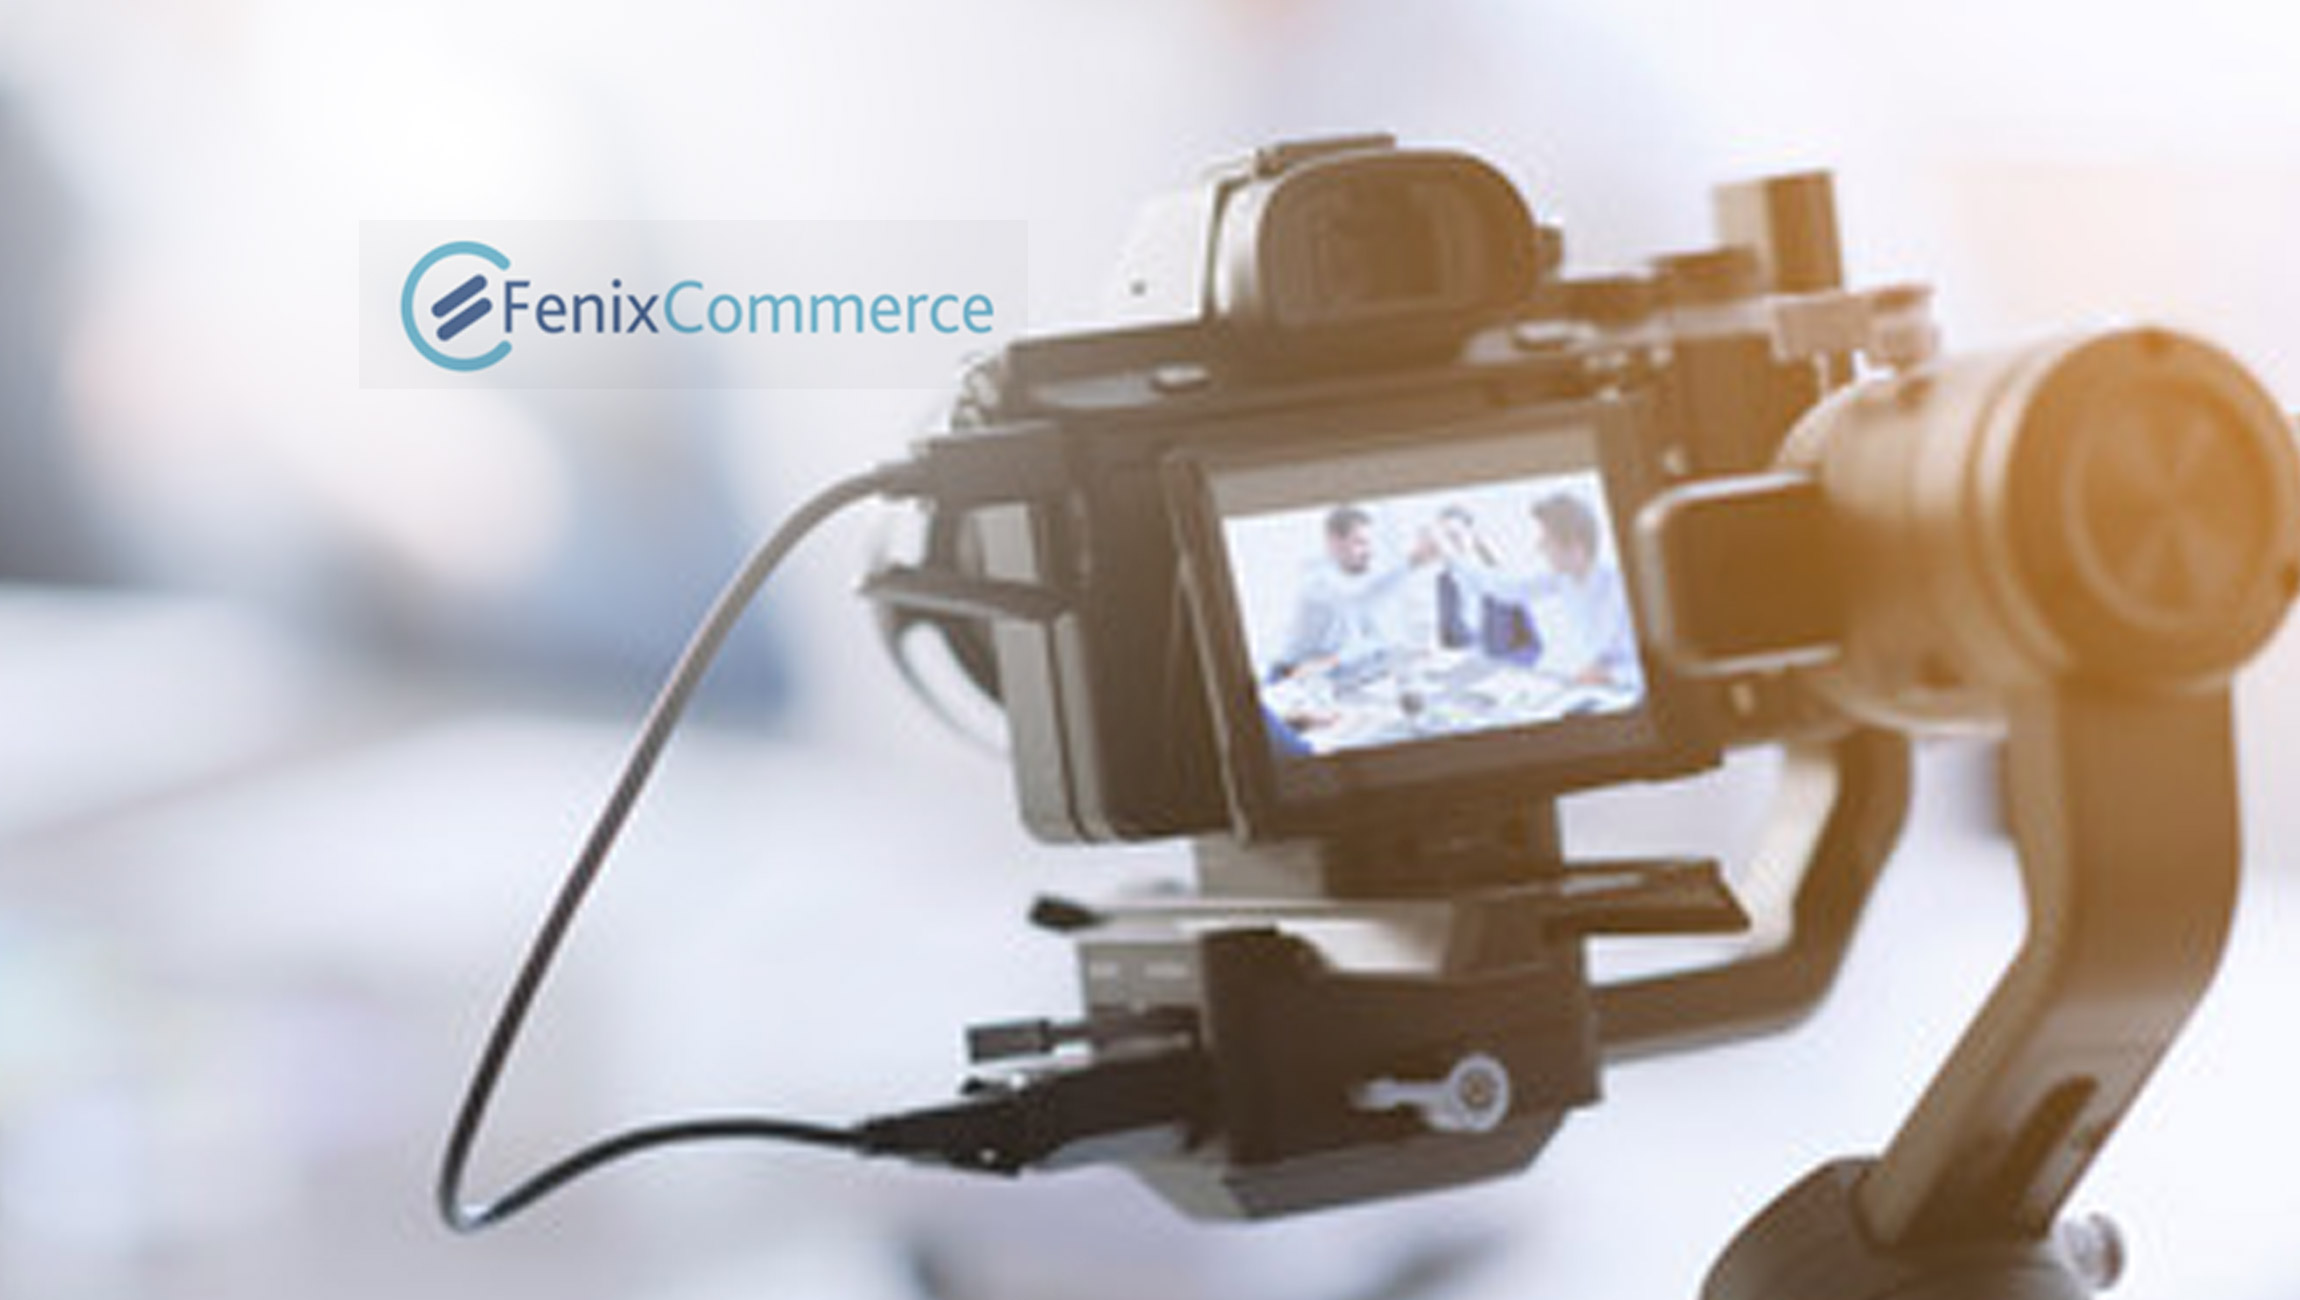 Fenix-Commerce-Provides-Customers-with-Video-and-Blog-Content-to-Better-E-commerce-Businesses